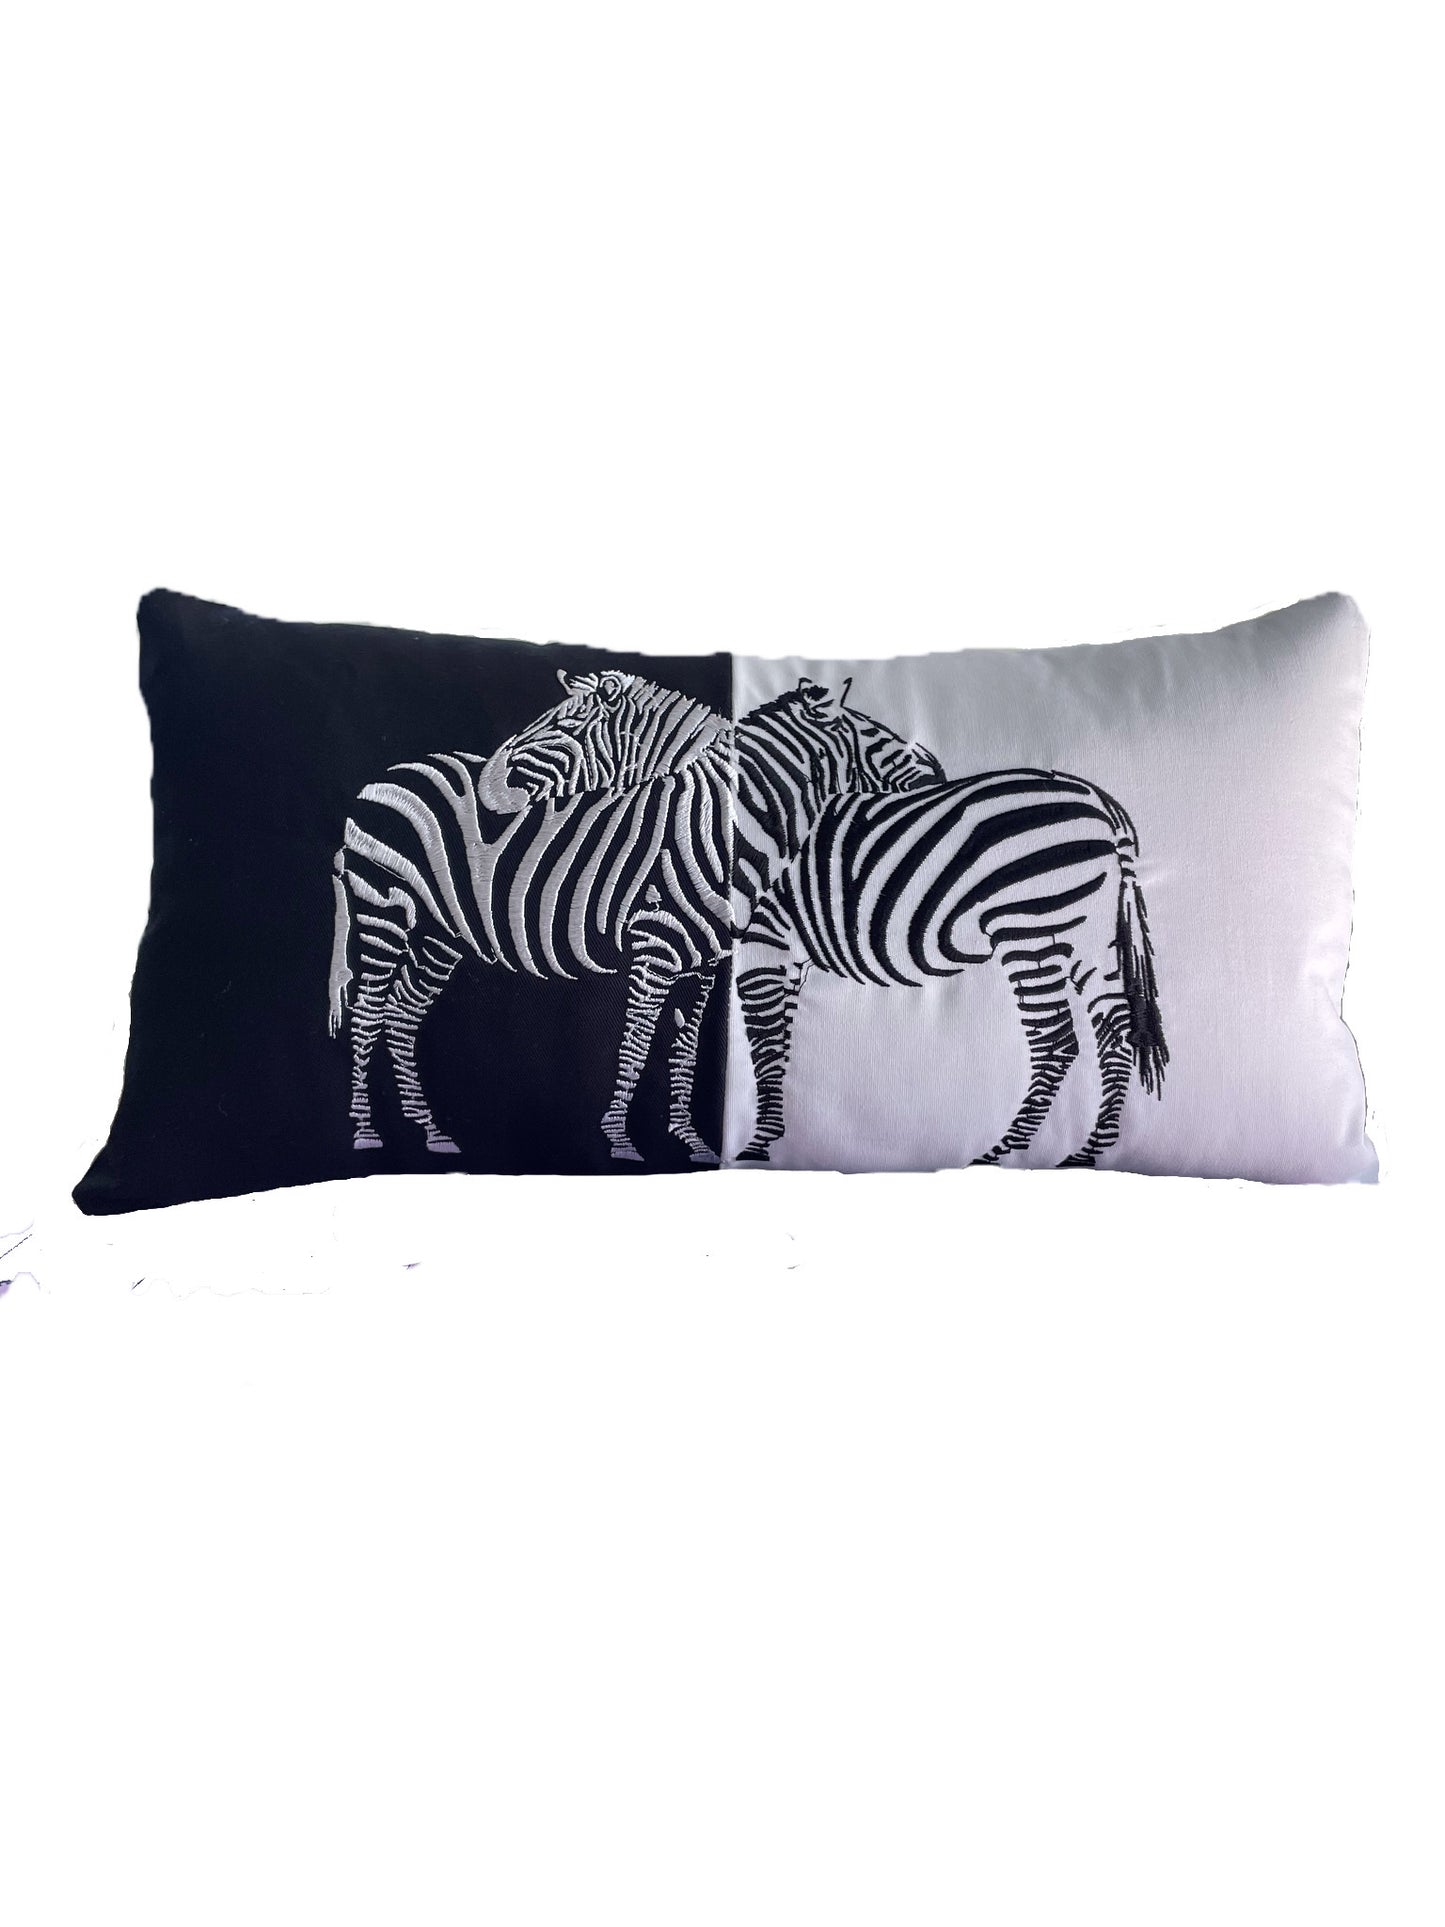 Black and White Intertwined Zebra Throw Pillow Cover 12” x 18” Cotton